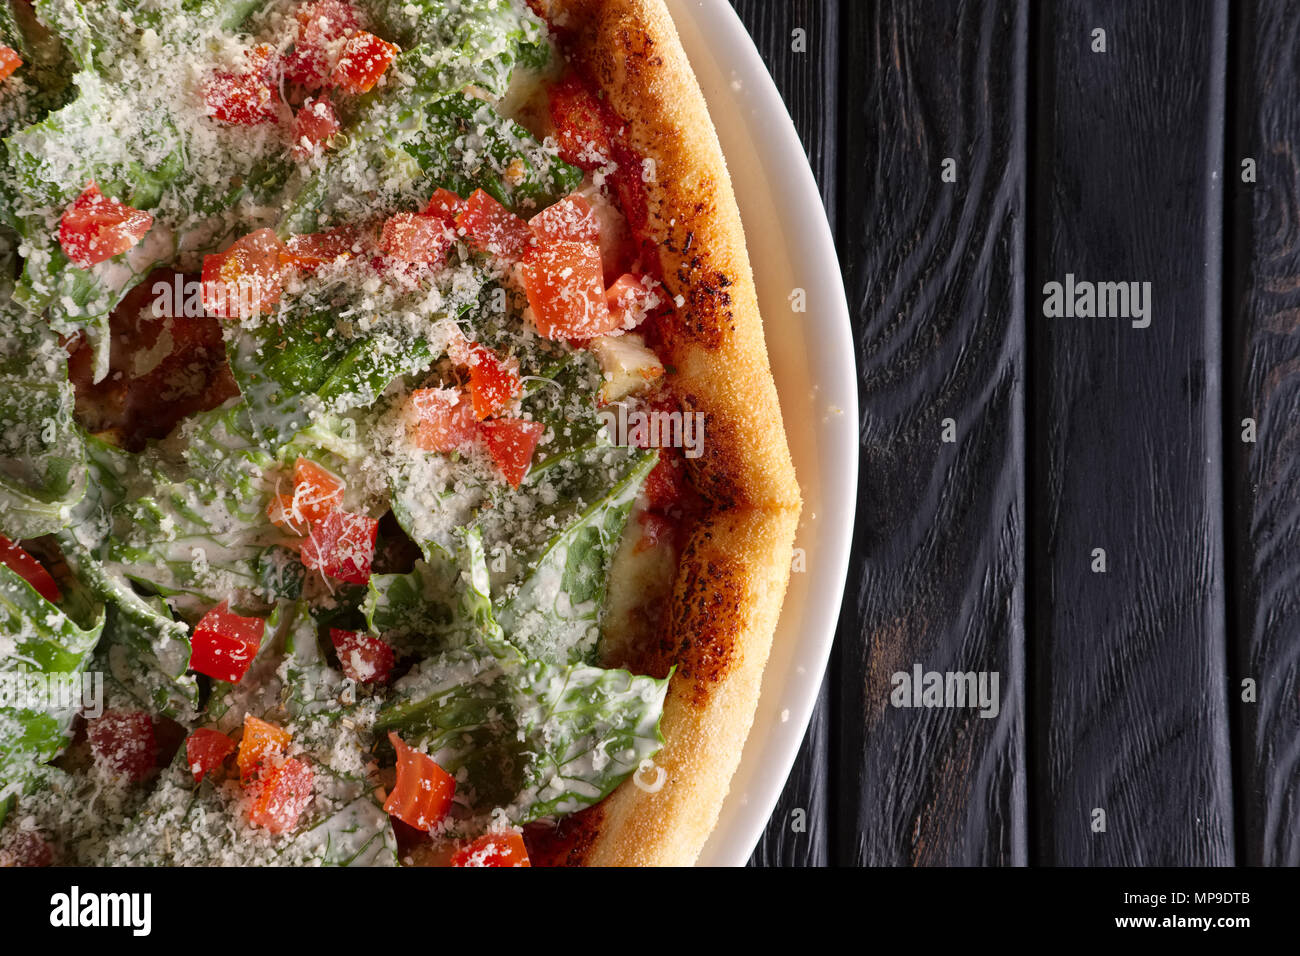 Top view of pizza with ham and green salad leaves arugula (salad rocket) Stock Photo